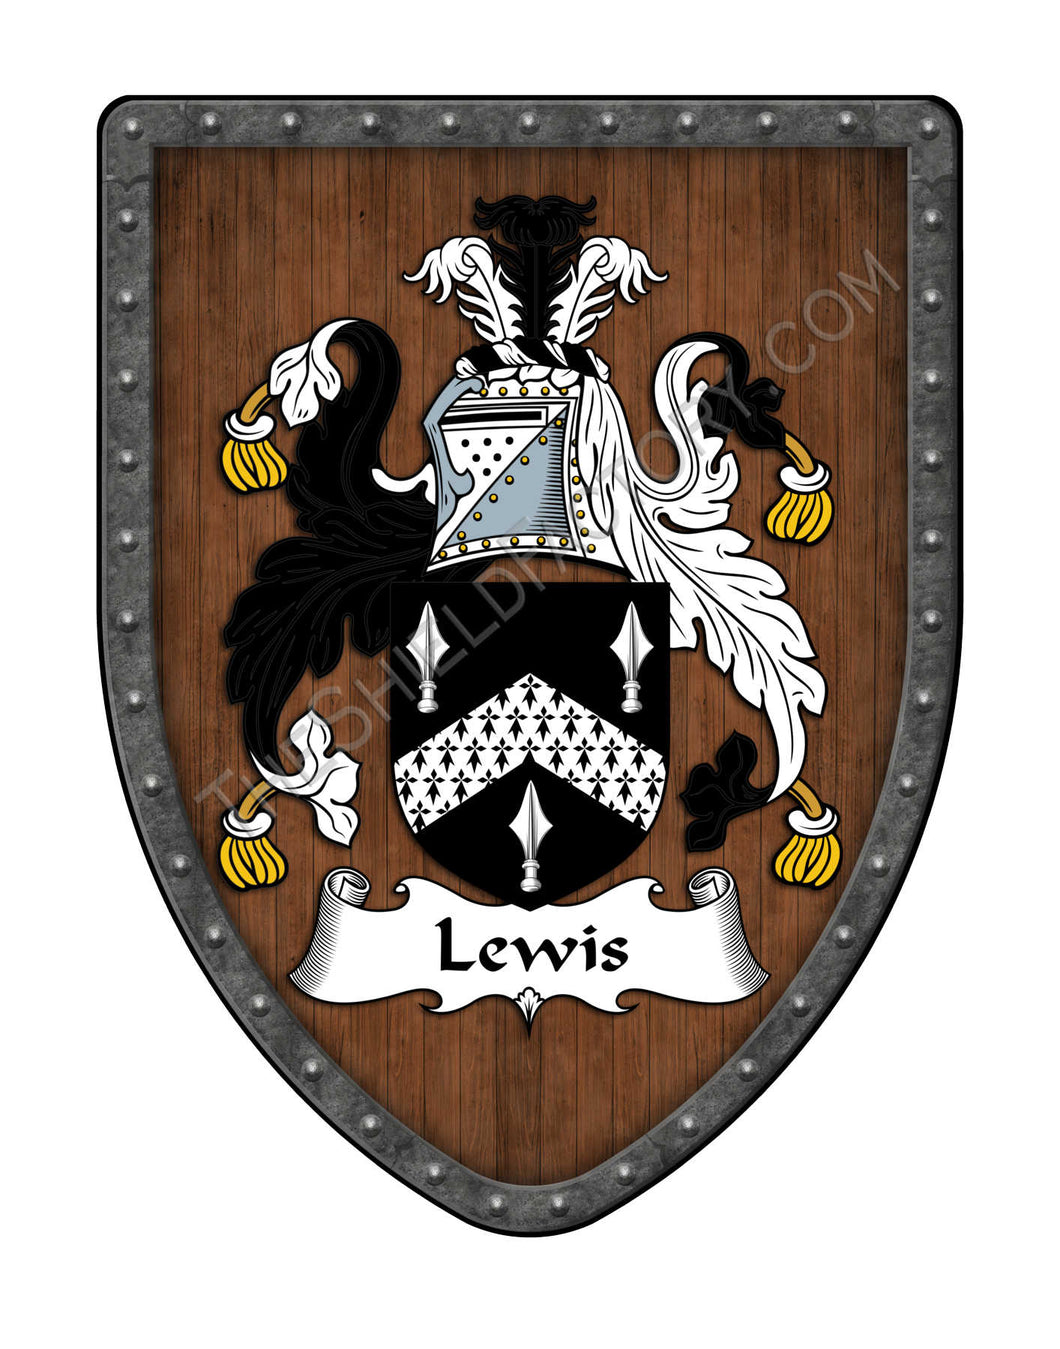 Lewis Family Coat of Arms Shield